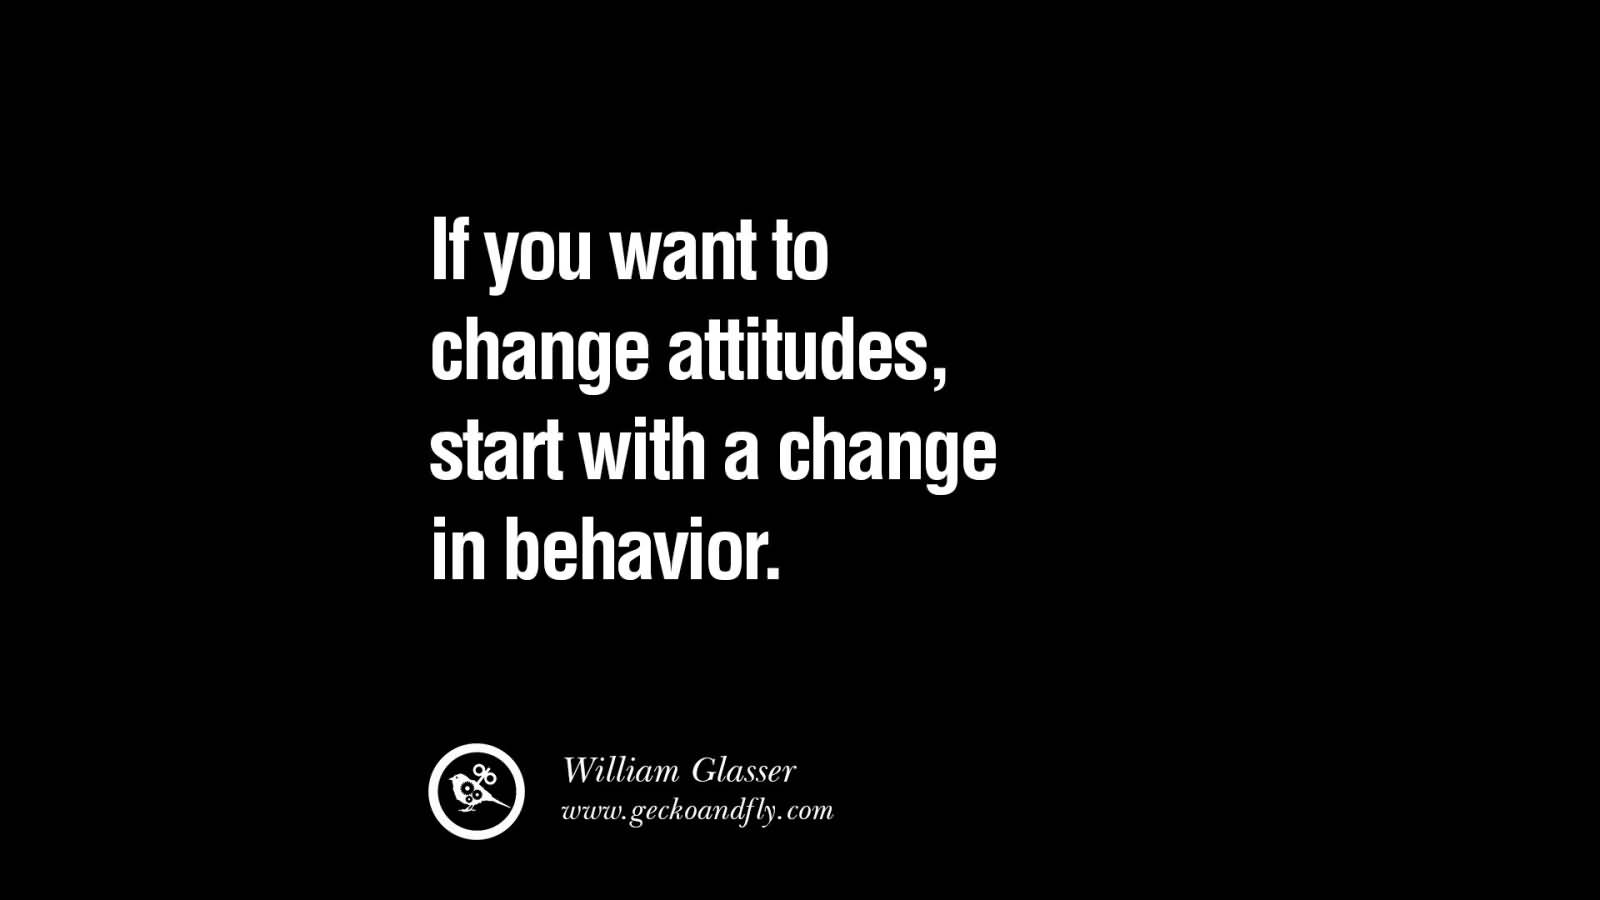 If you want to change attitudes, start with a change in behavior. William Glasser